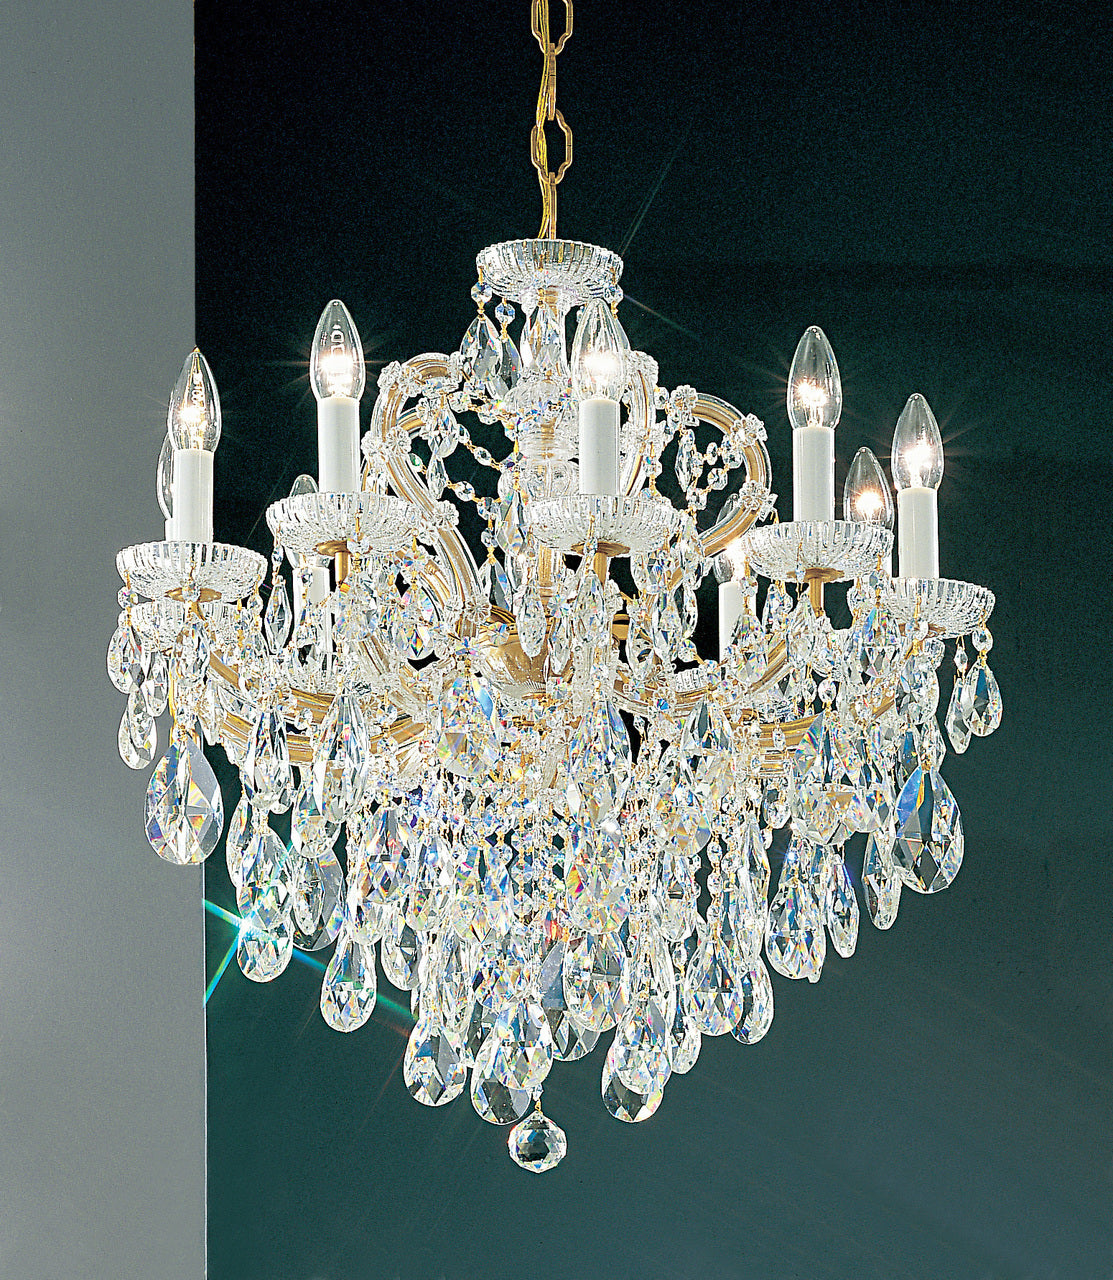 Classic Lighting 8120 OWG S Maria Theresa Traditional Crystal Chandelier in Olde World Gold (Imported from Italy)